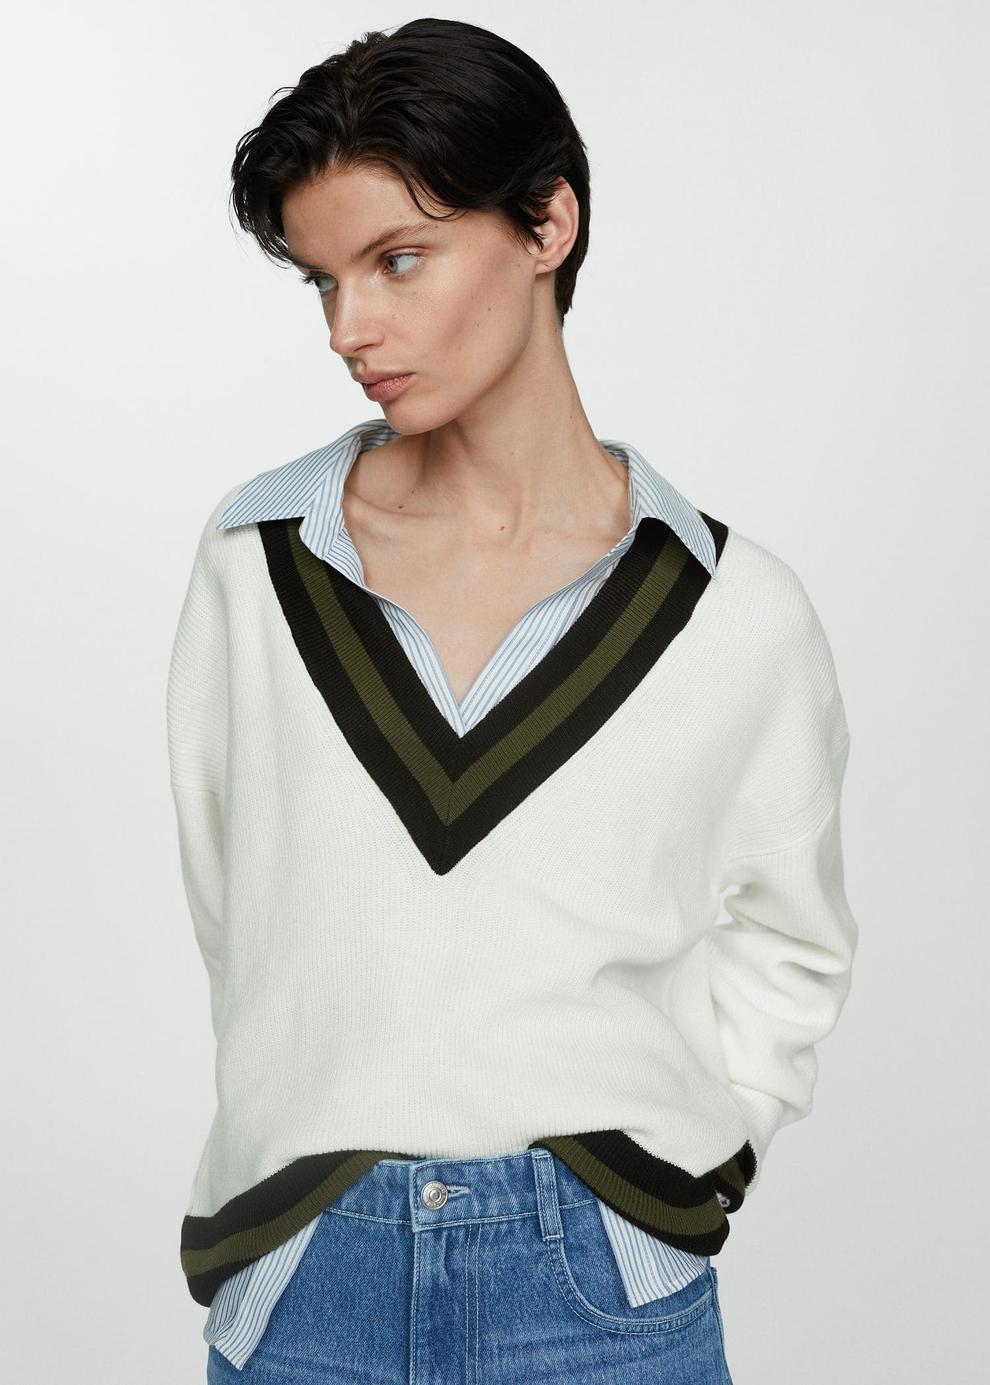 Contrasting V-neck sweater offers at £22.99 in MANGO